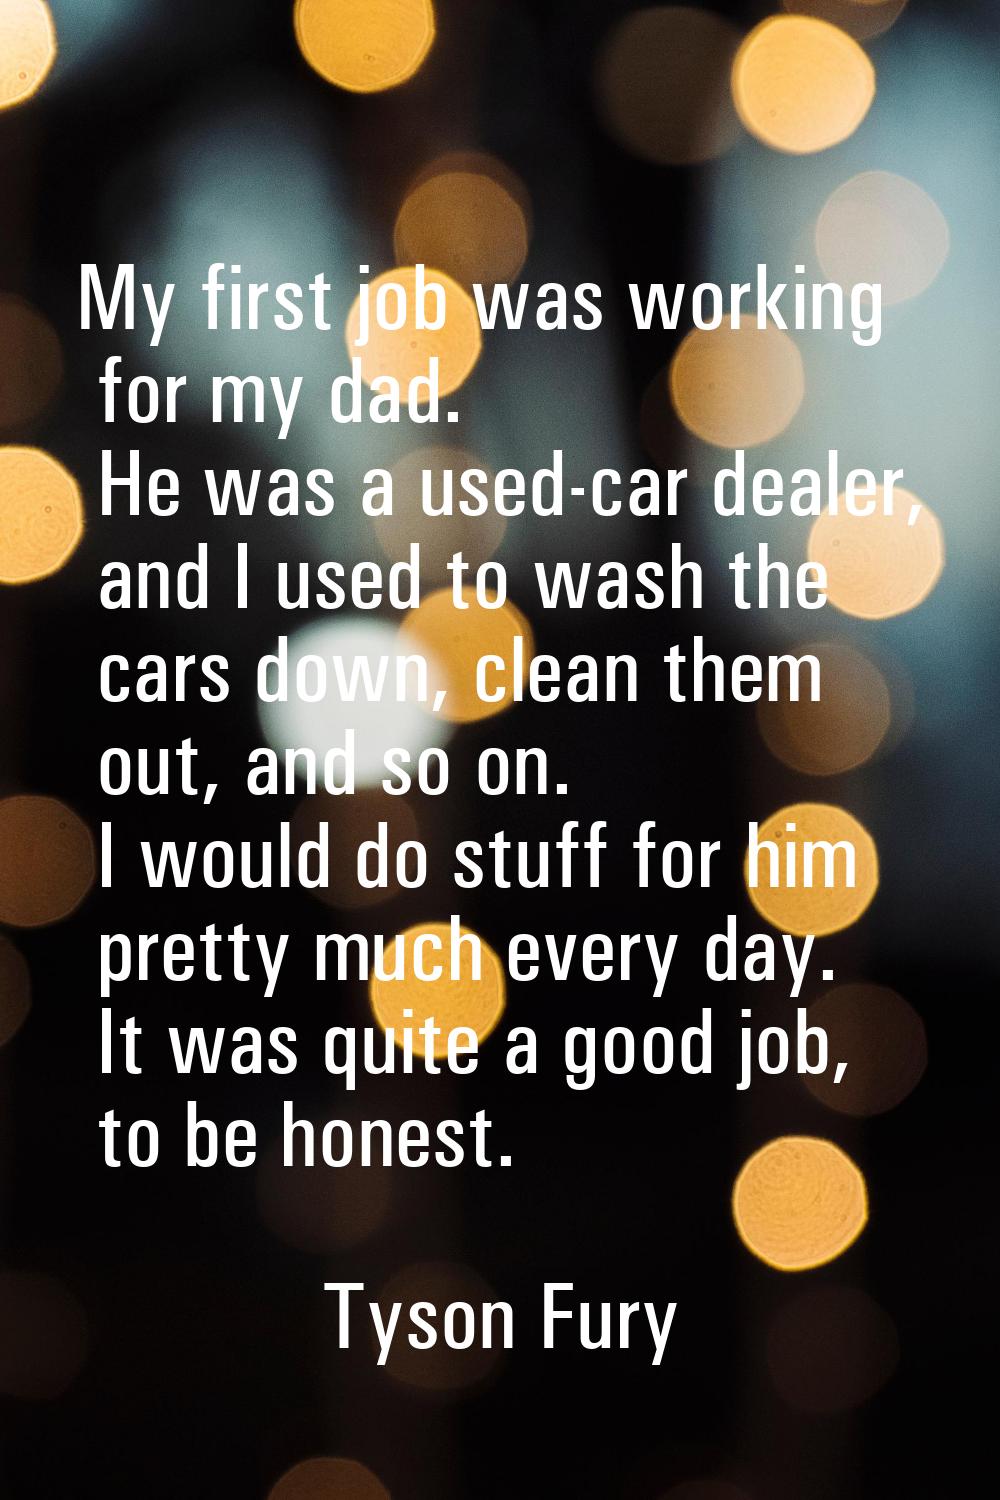 My first job was working for my dad. He was a used-car dealer, and I used to wash the cars down, cl